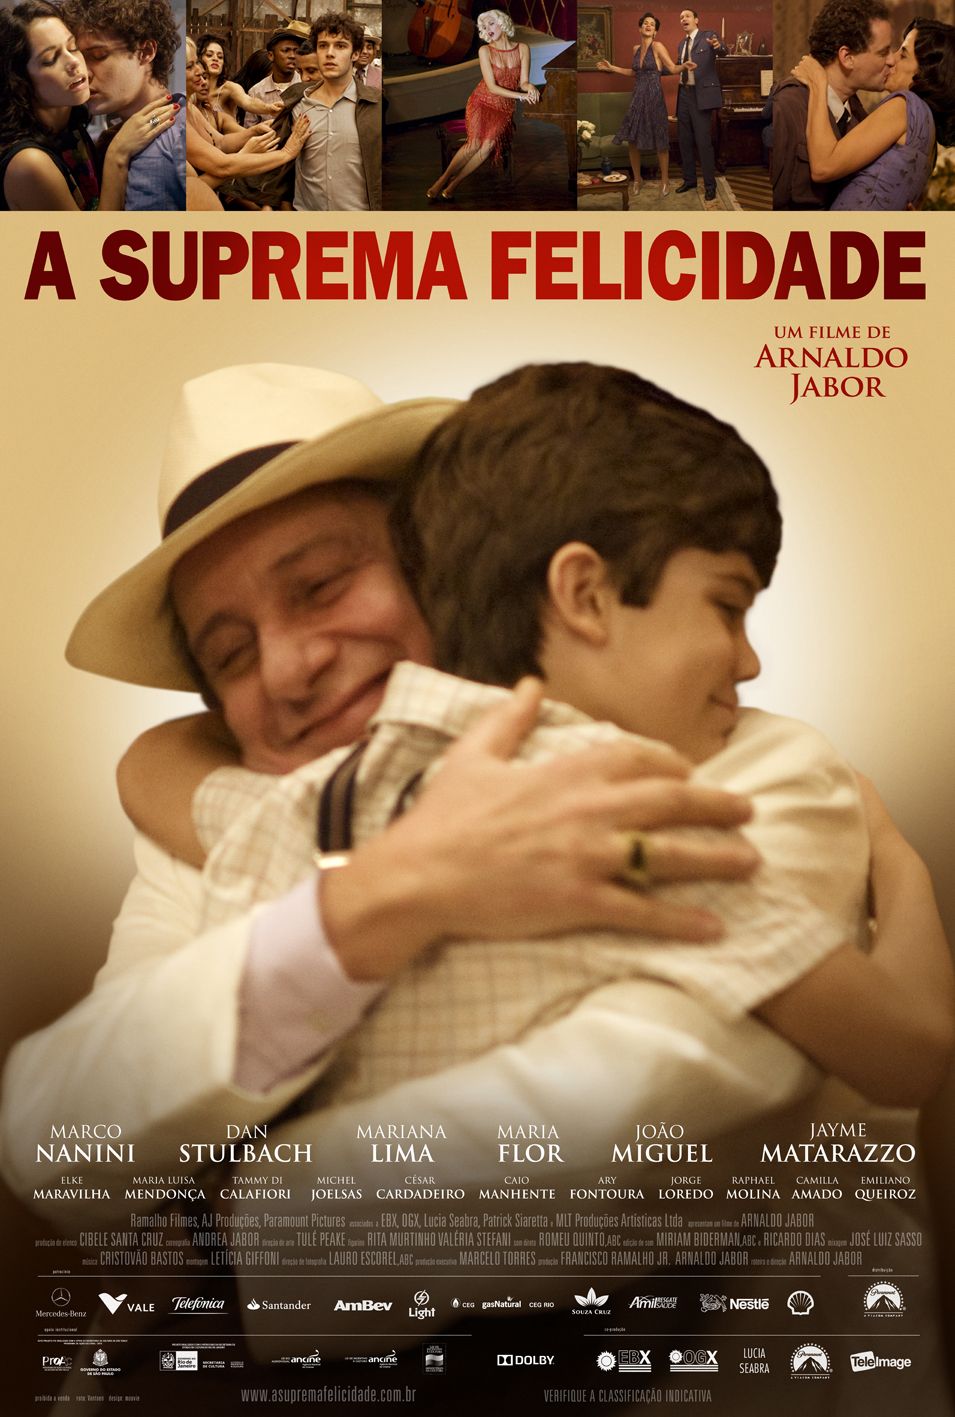 Extra Large Movie Poster Image for A Suprema Felicidade 